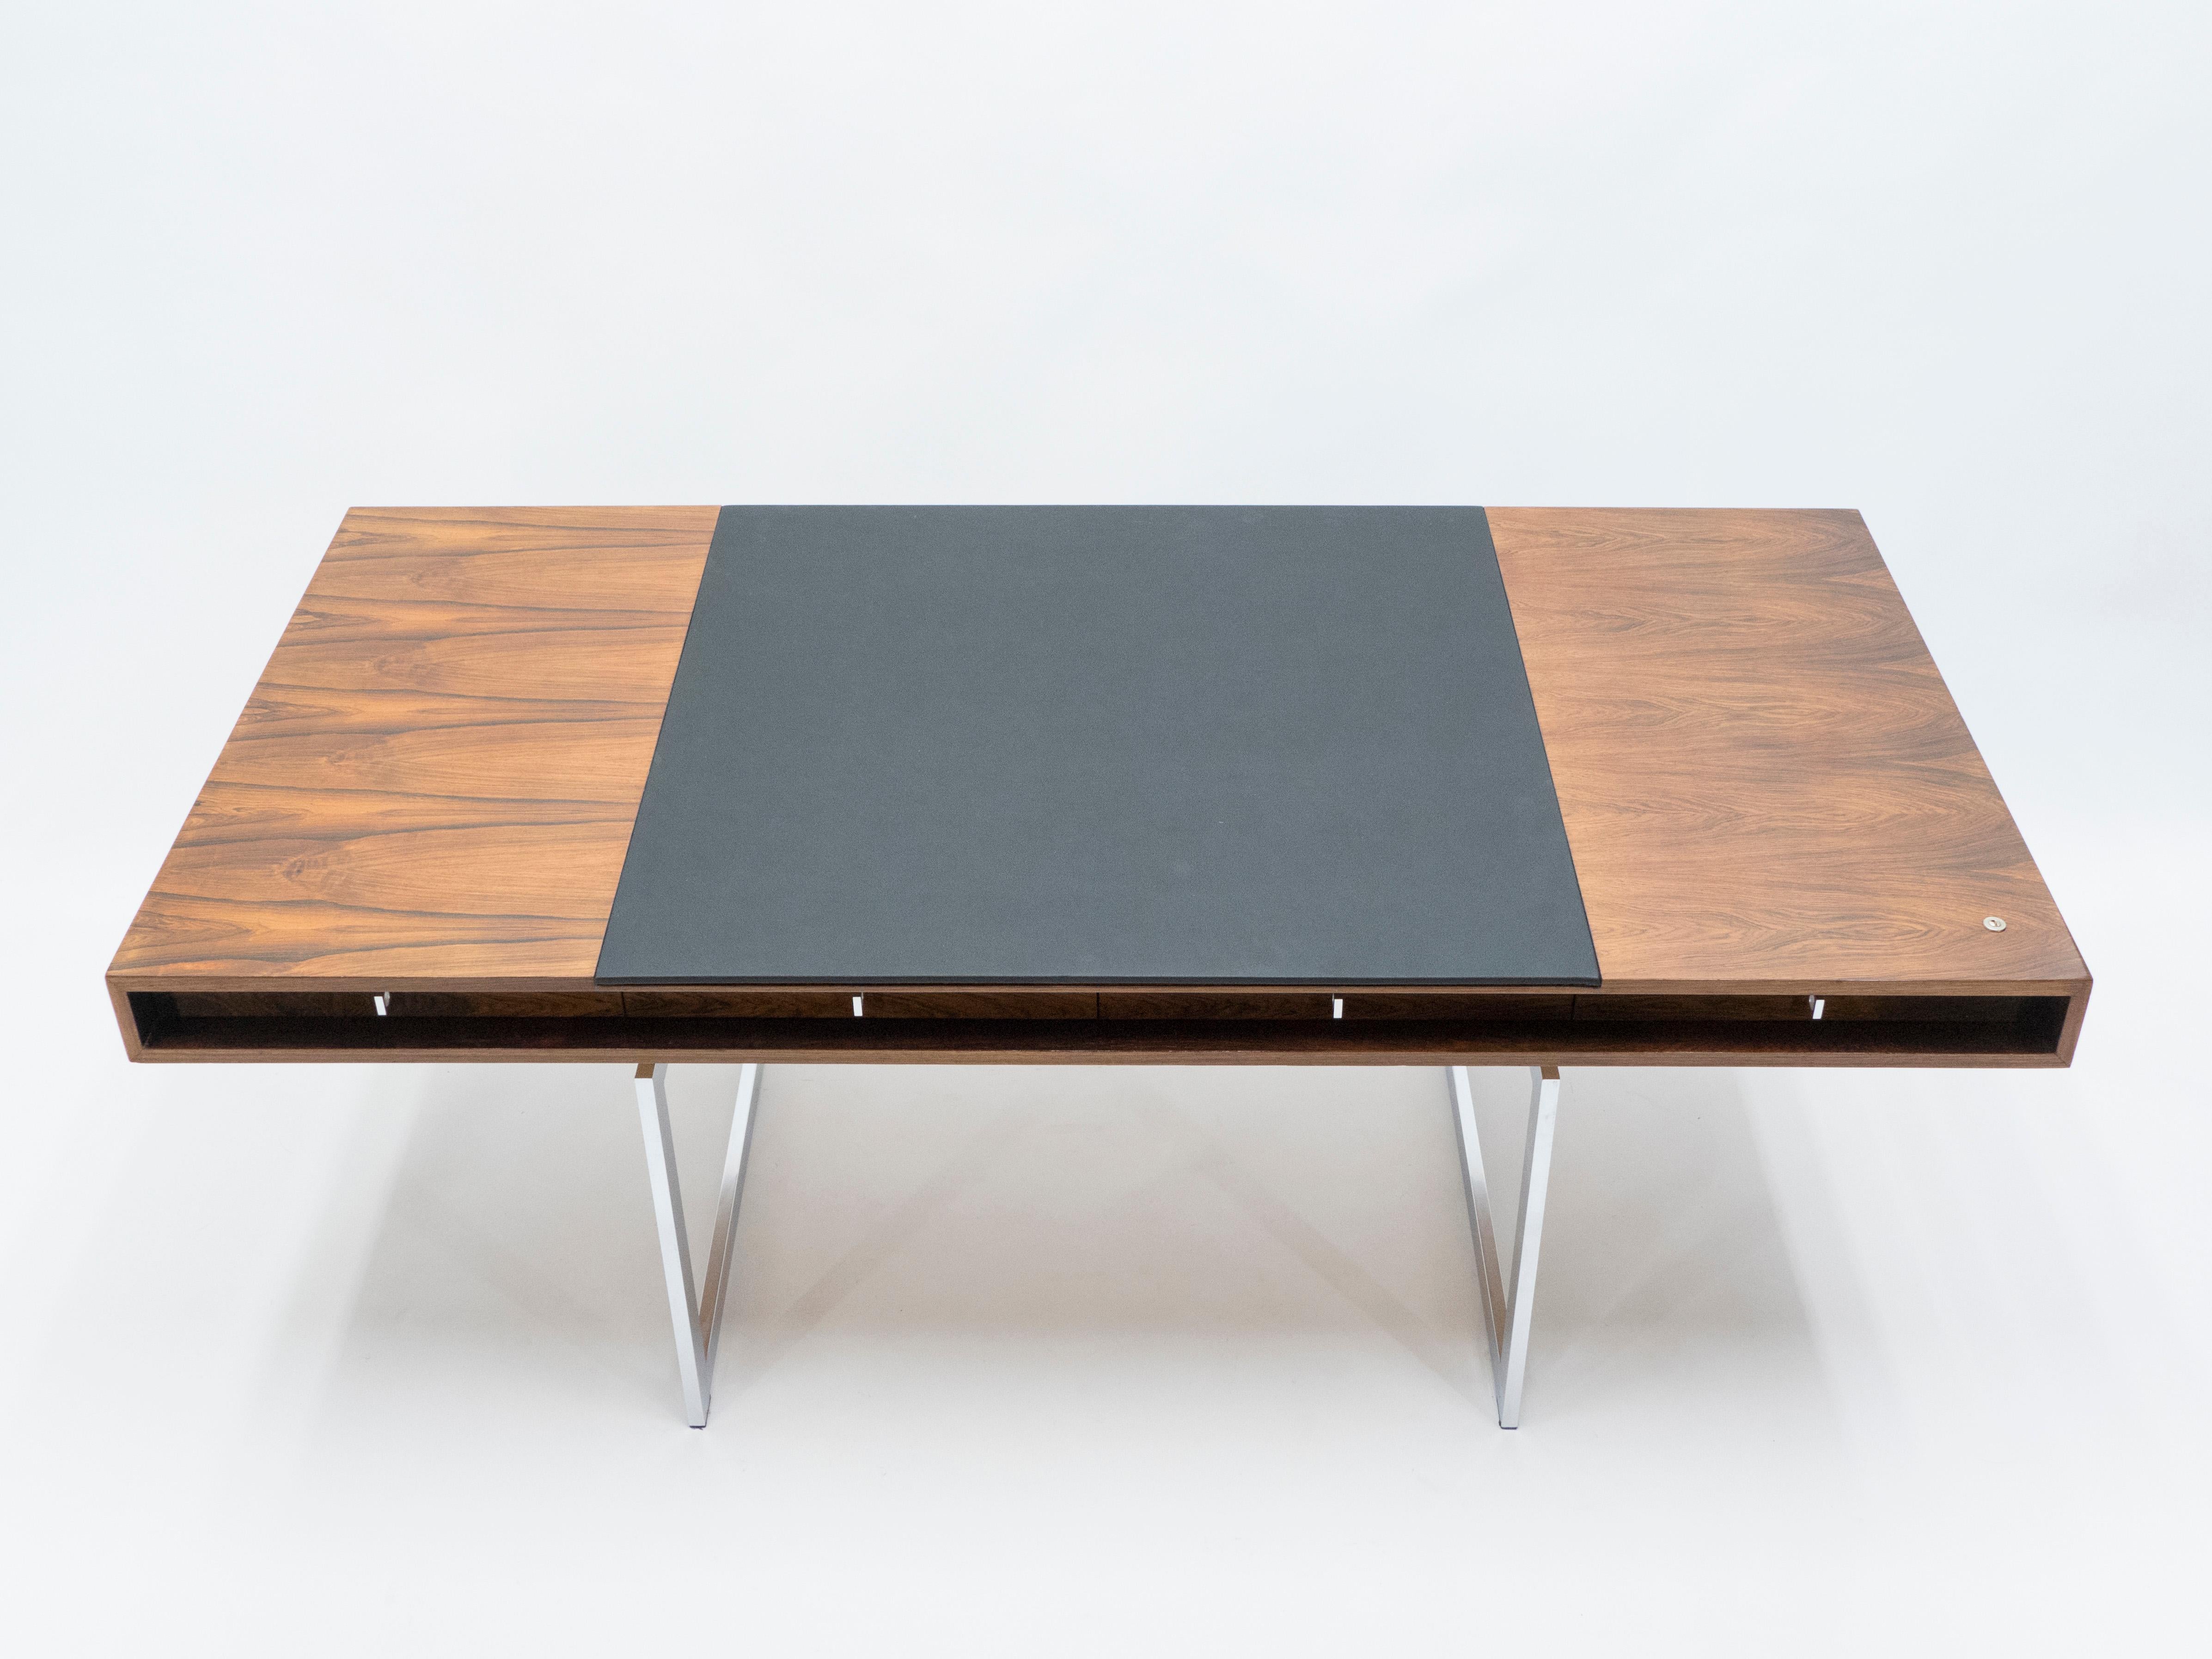 This is a unique desk, called the “working table” by Bodil Kjaer when she designed it in 1959. Produced by E. Pedersen & Søn in Denmark, this particular piece was made on request in the early 1960s with an adjusted leather top, in Brazilian Rosewood